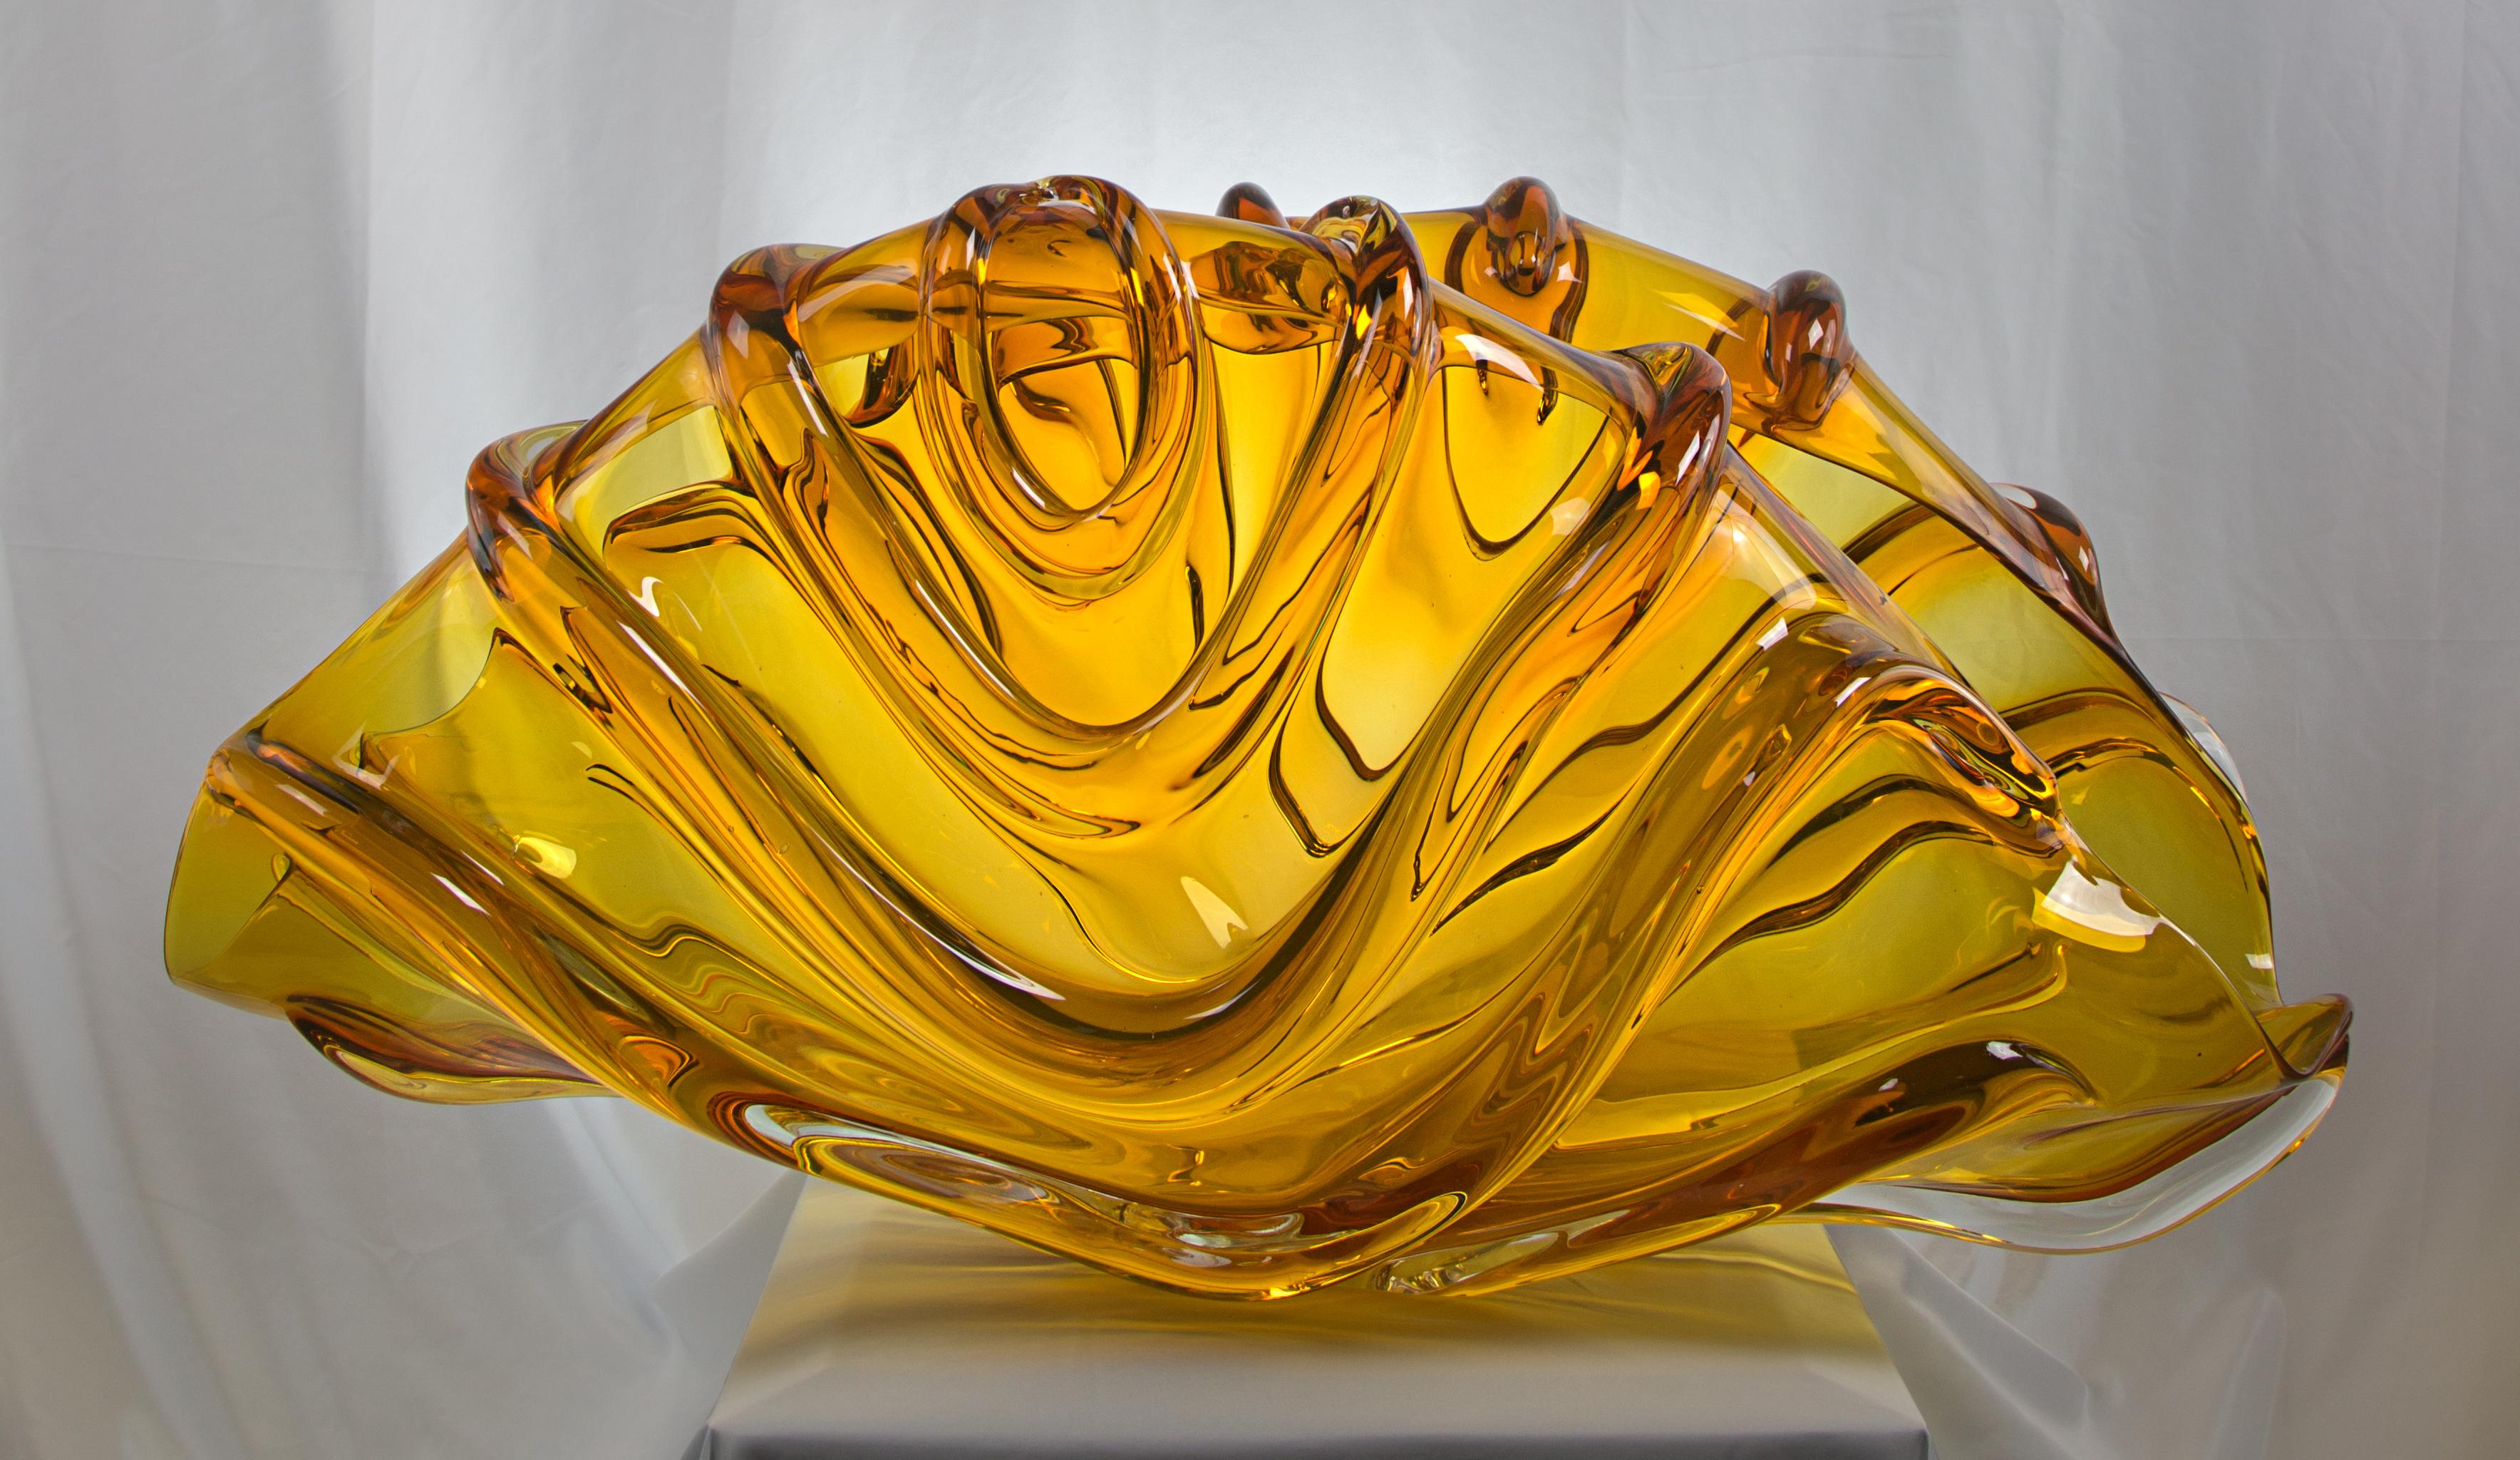 Rope Bowl.  Contemporary blown glass sculpture